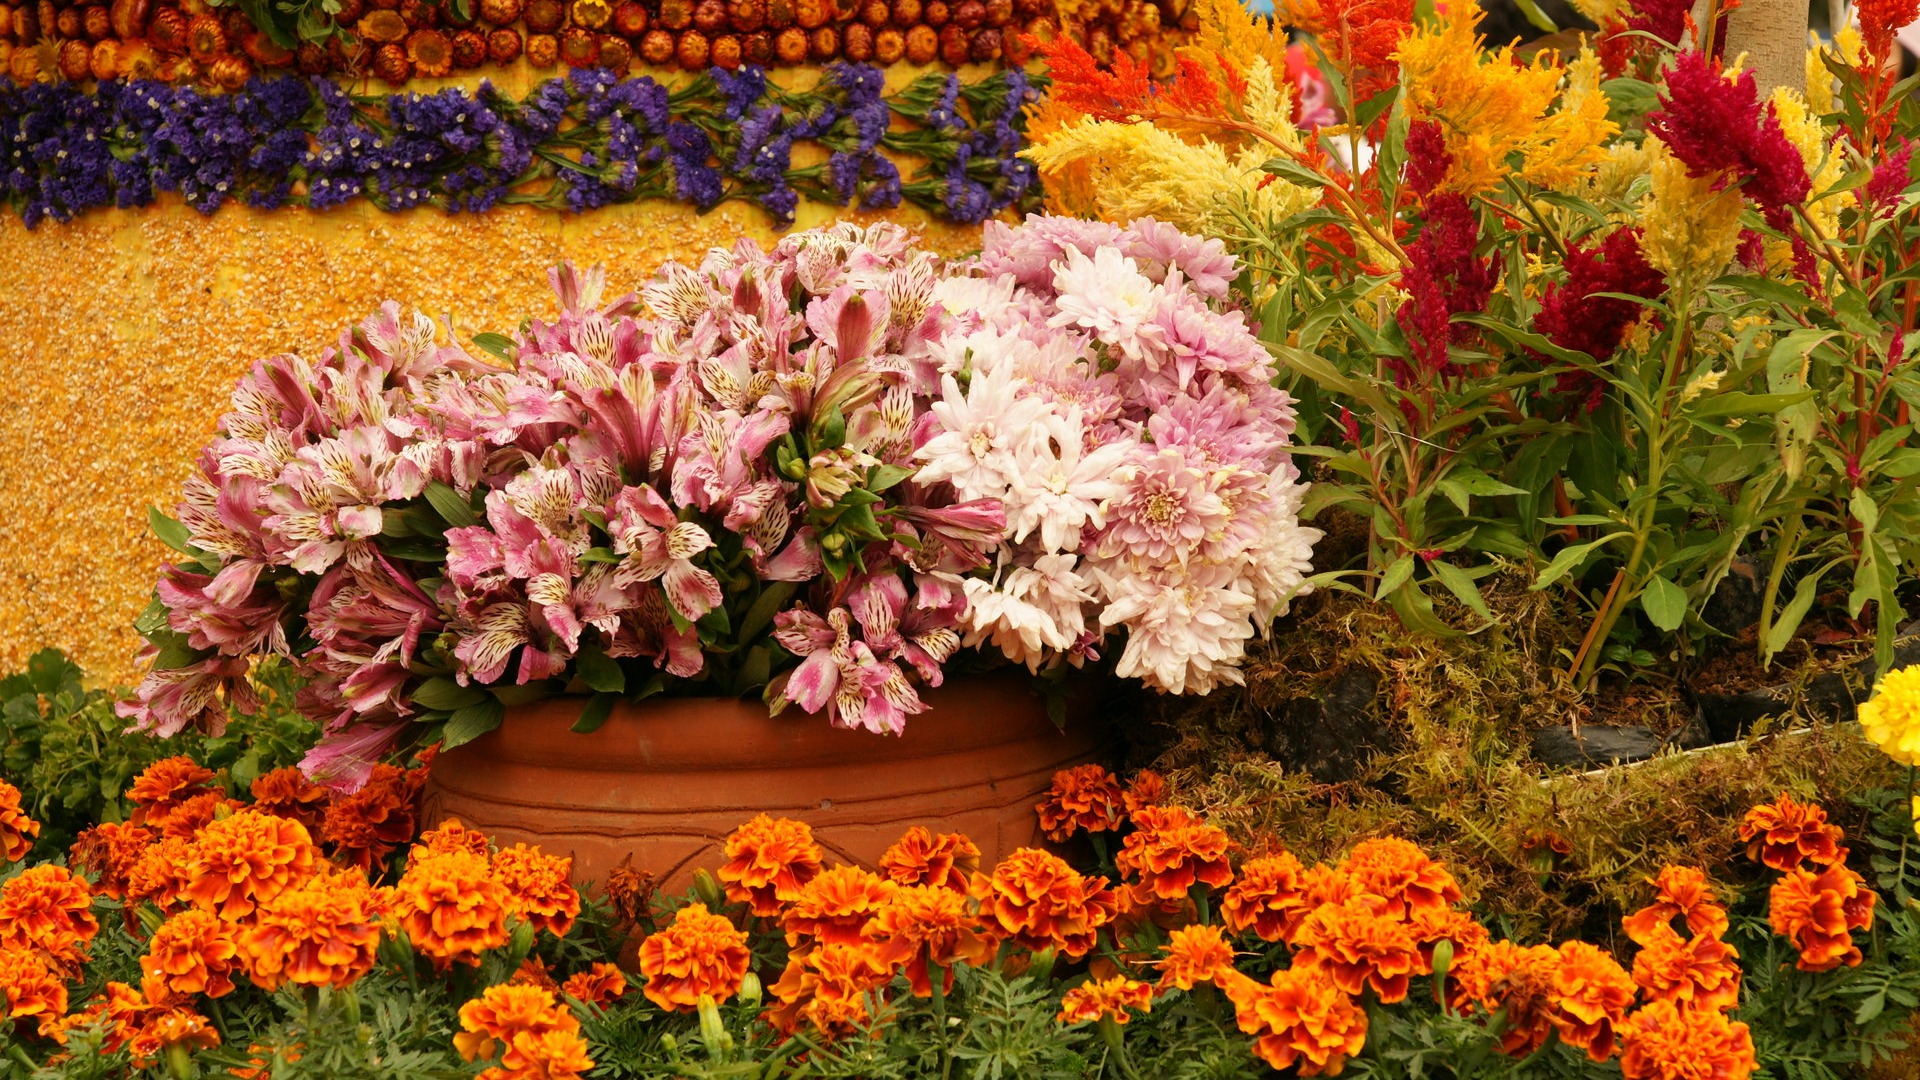 Colorful flowers decorate wallpaper (4) #10 - 1920x1080